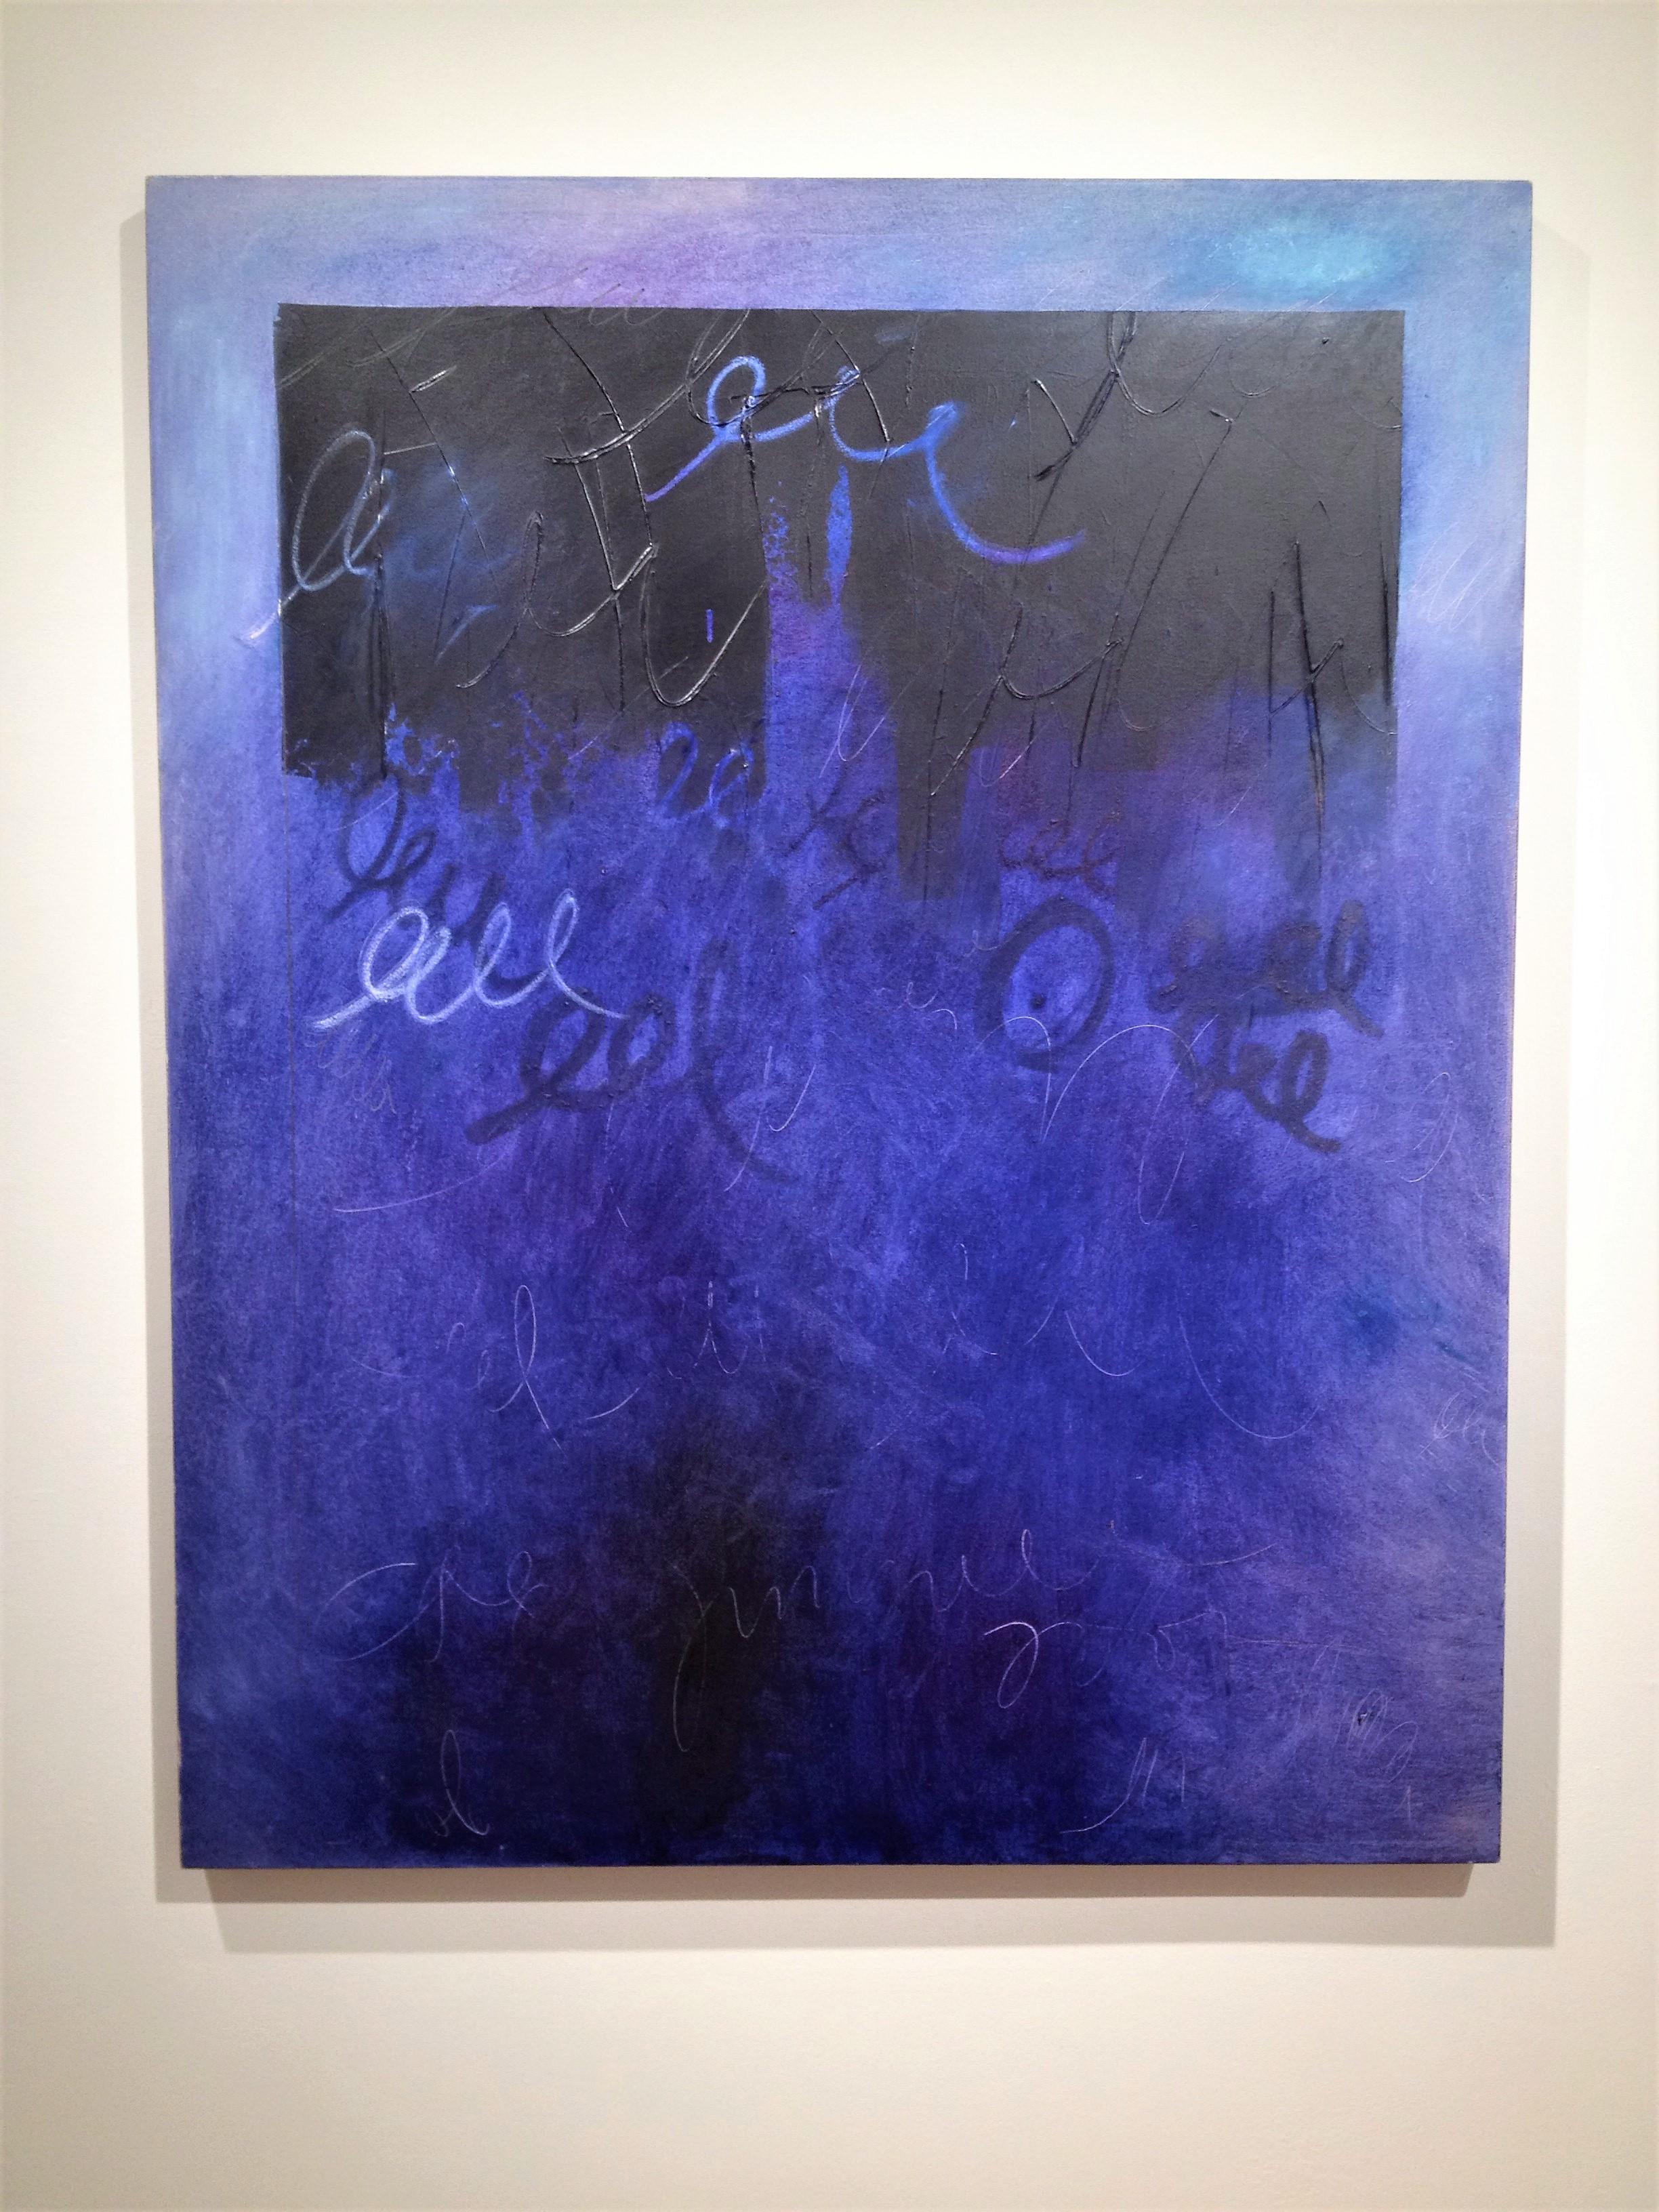 9-c27-2, large scale abstract cobalt blue painting with cursive writing  - Painting by Greg Gummersall